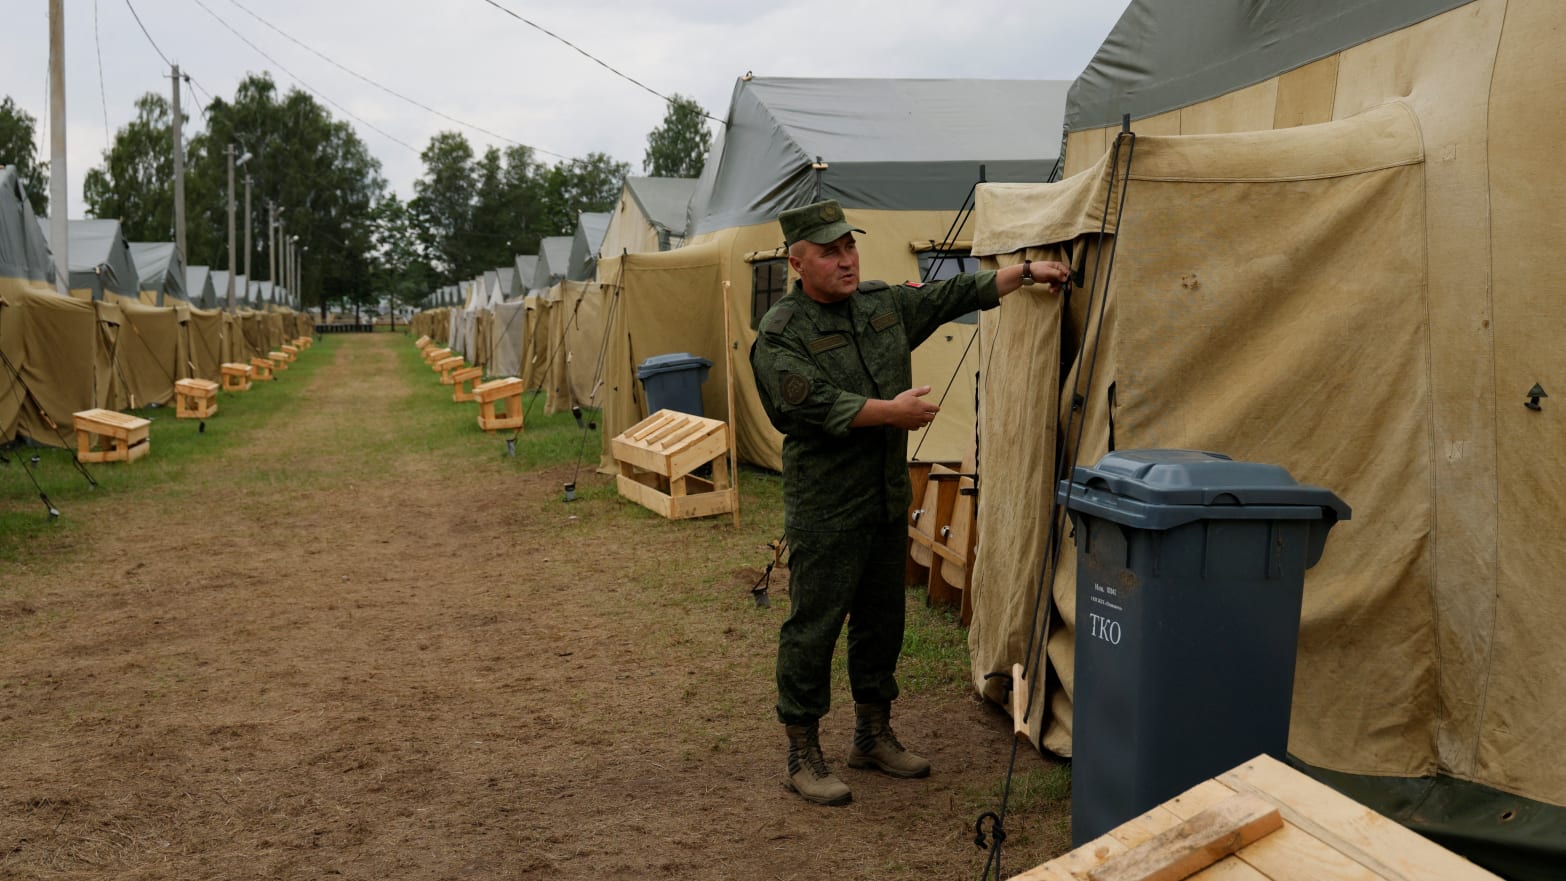 Major General Leonid Kasinsky shows off a tent at a camp near Tsel, Belarus, offered to Wagner fighters after the armed rebellion led by Yevgeny Prigozhin.